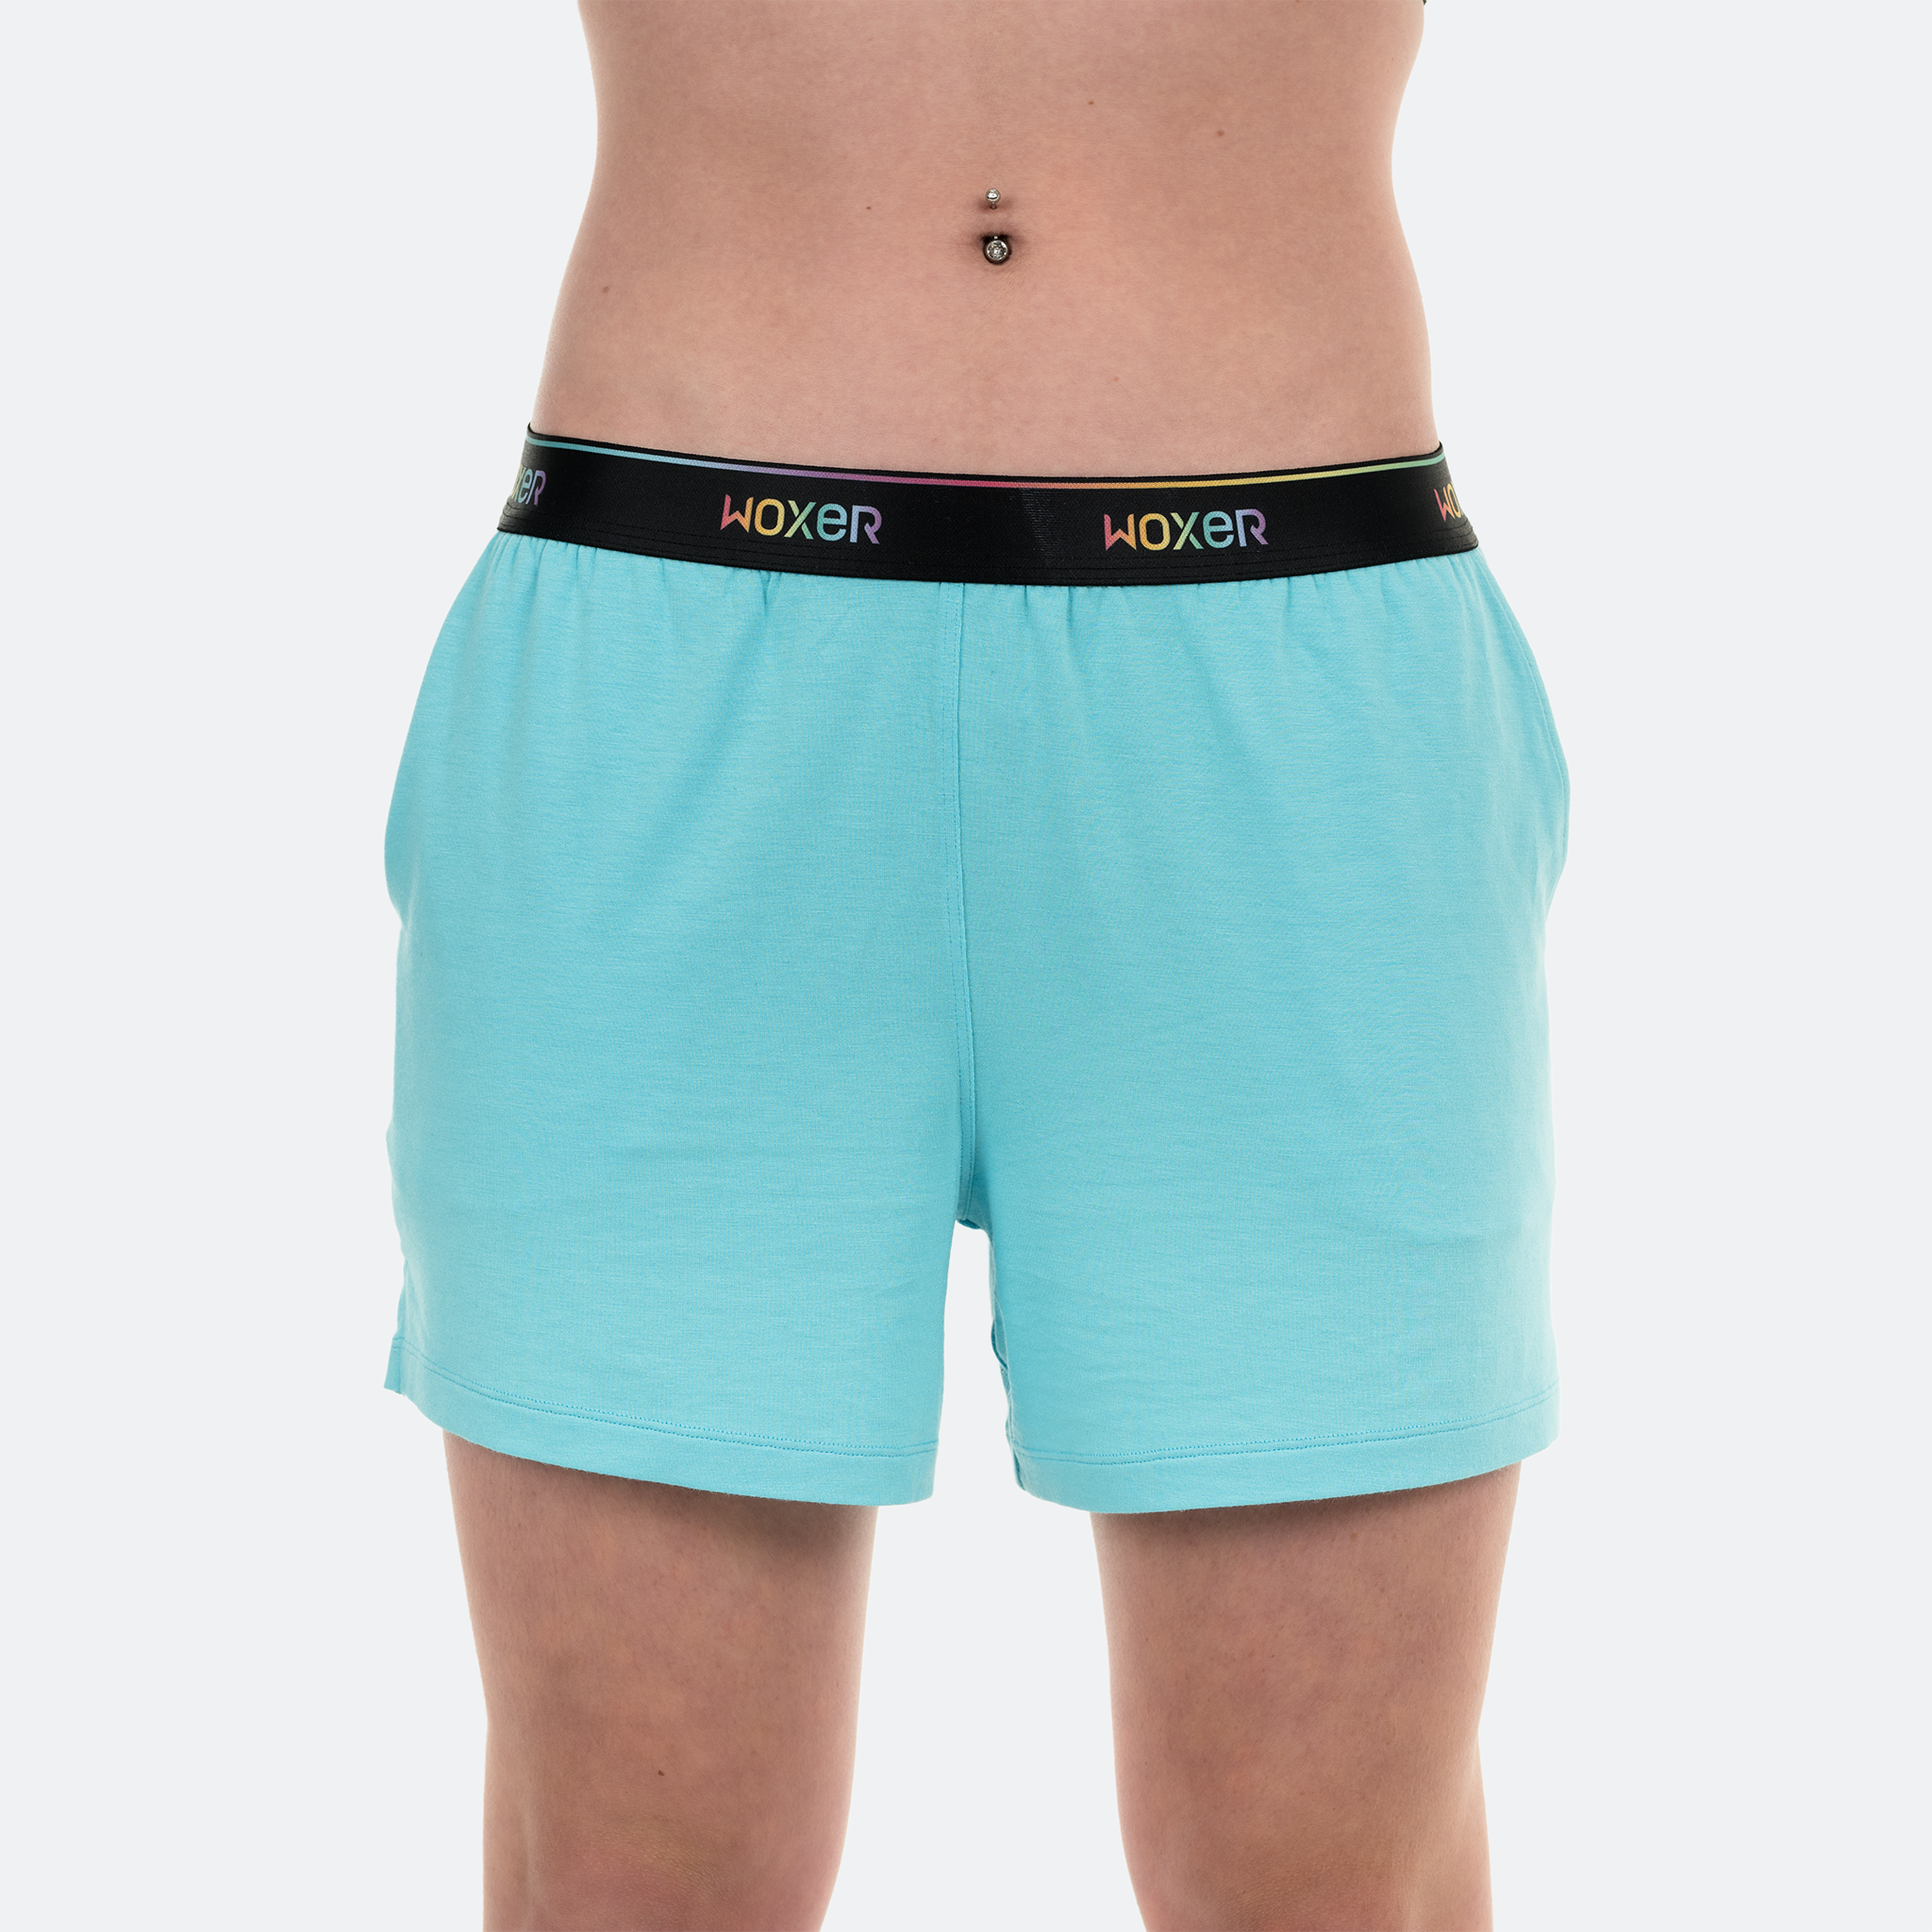 We made boxer with pockets! #pockets #pocket #woxer #boxer #boxerunder